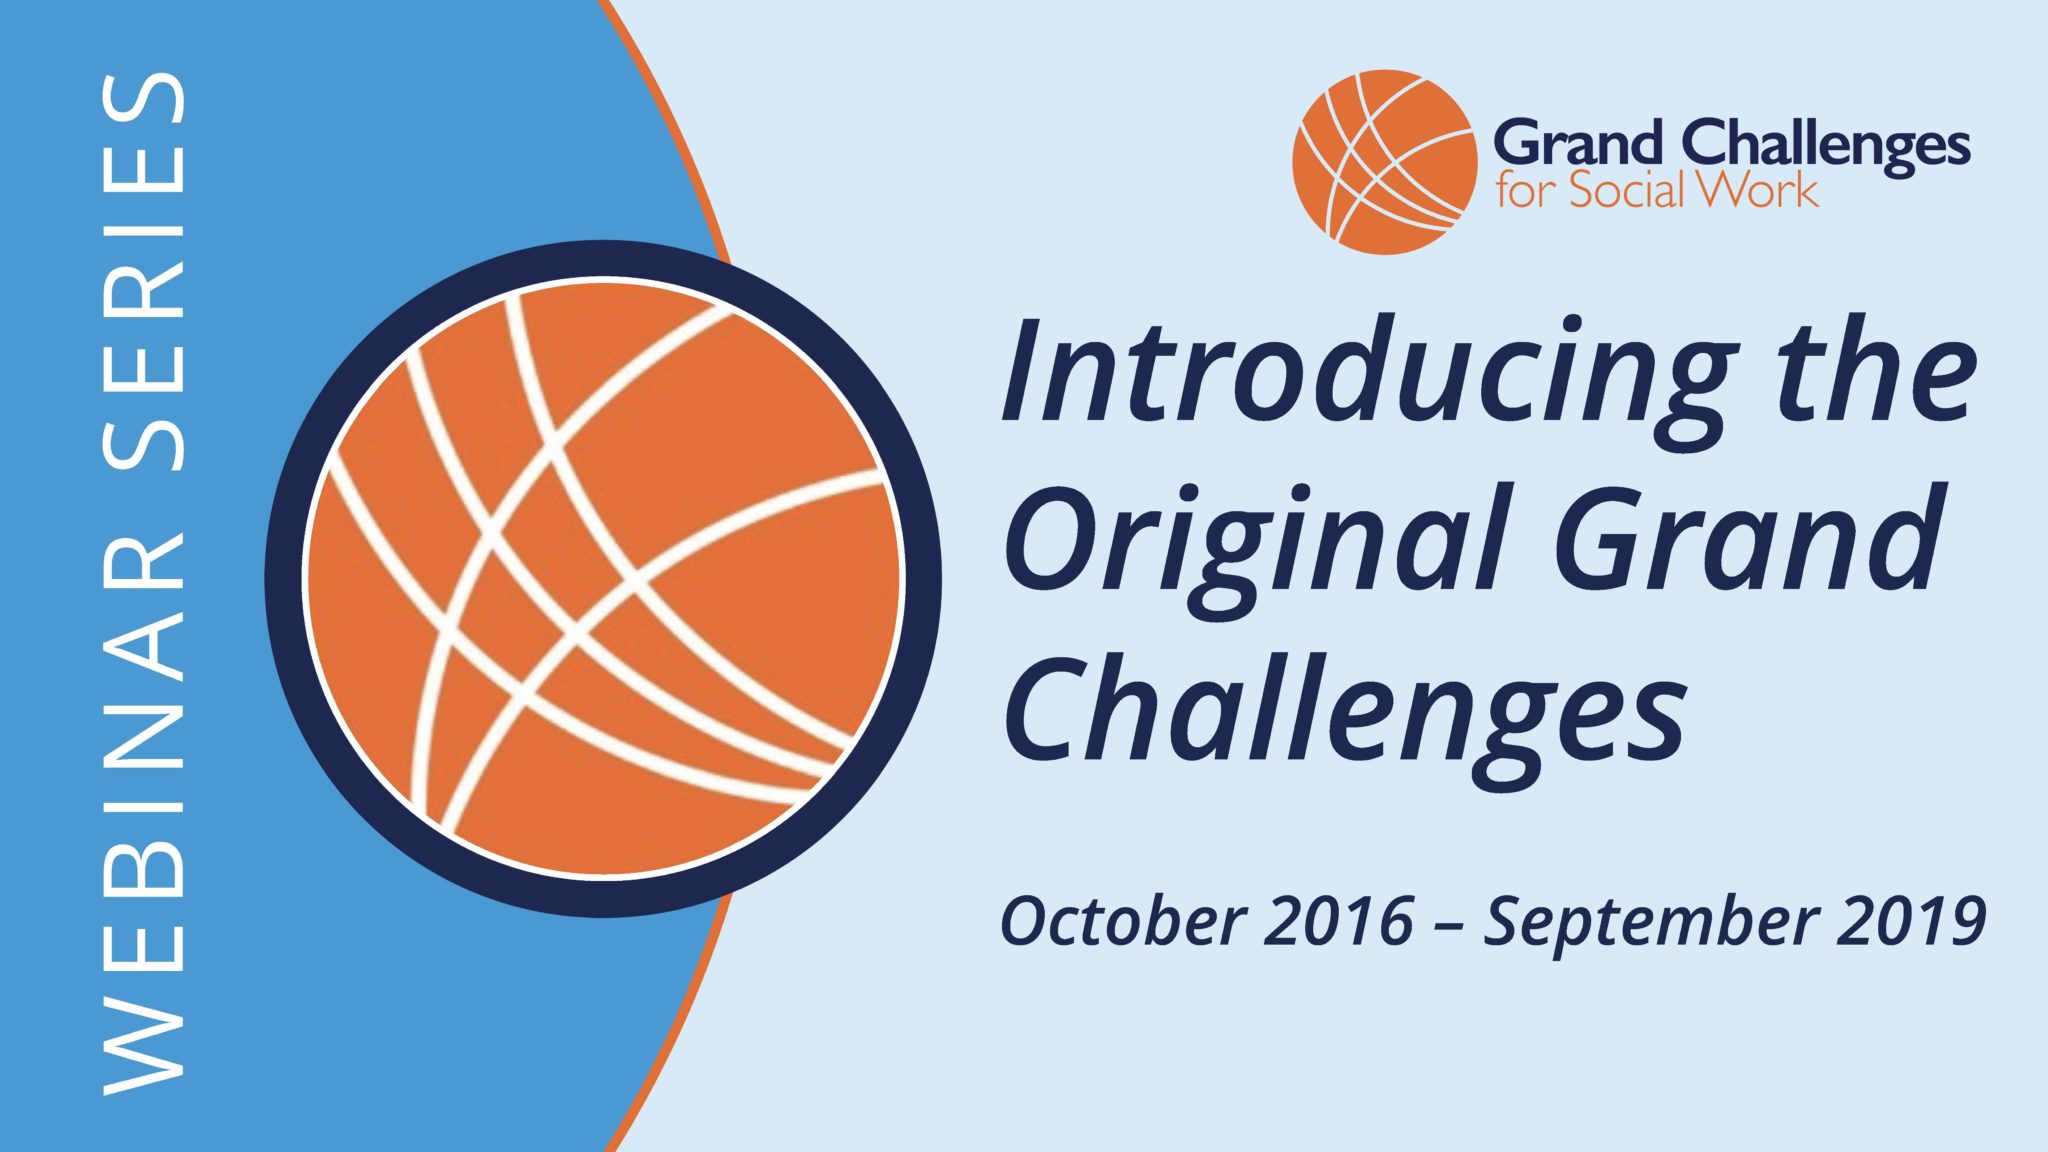 Introducing the Original Grand Challenges Grand Challenges for Social